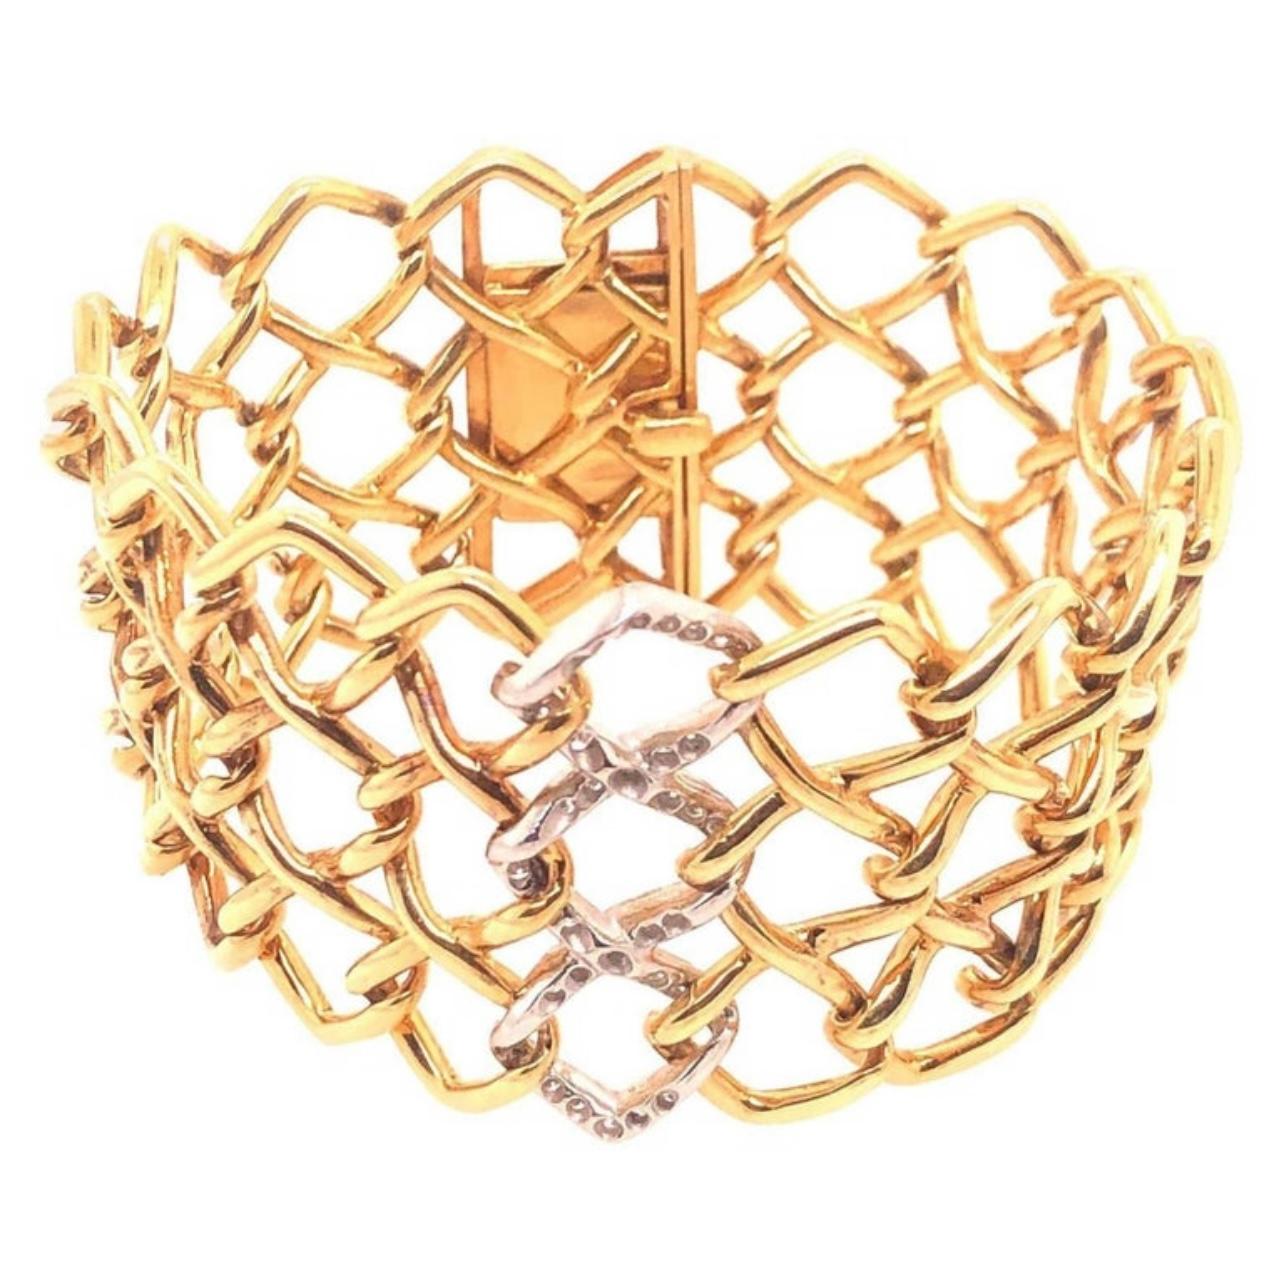 Estate Tiffany & Co. by Paloma Picasso Yellow Gold and Platinum Diamond Bracelet. The bracelet features 0.80ctw of brilliant round cut diamonds. 
7